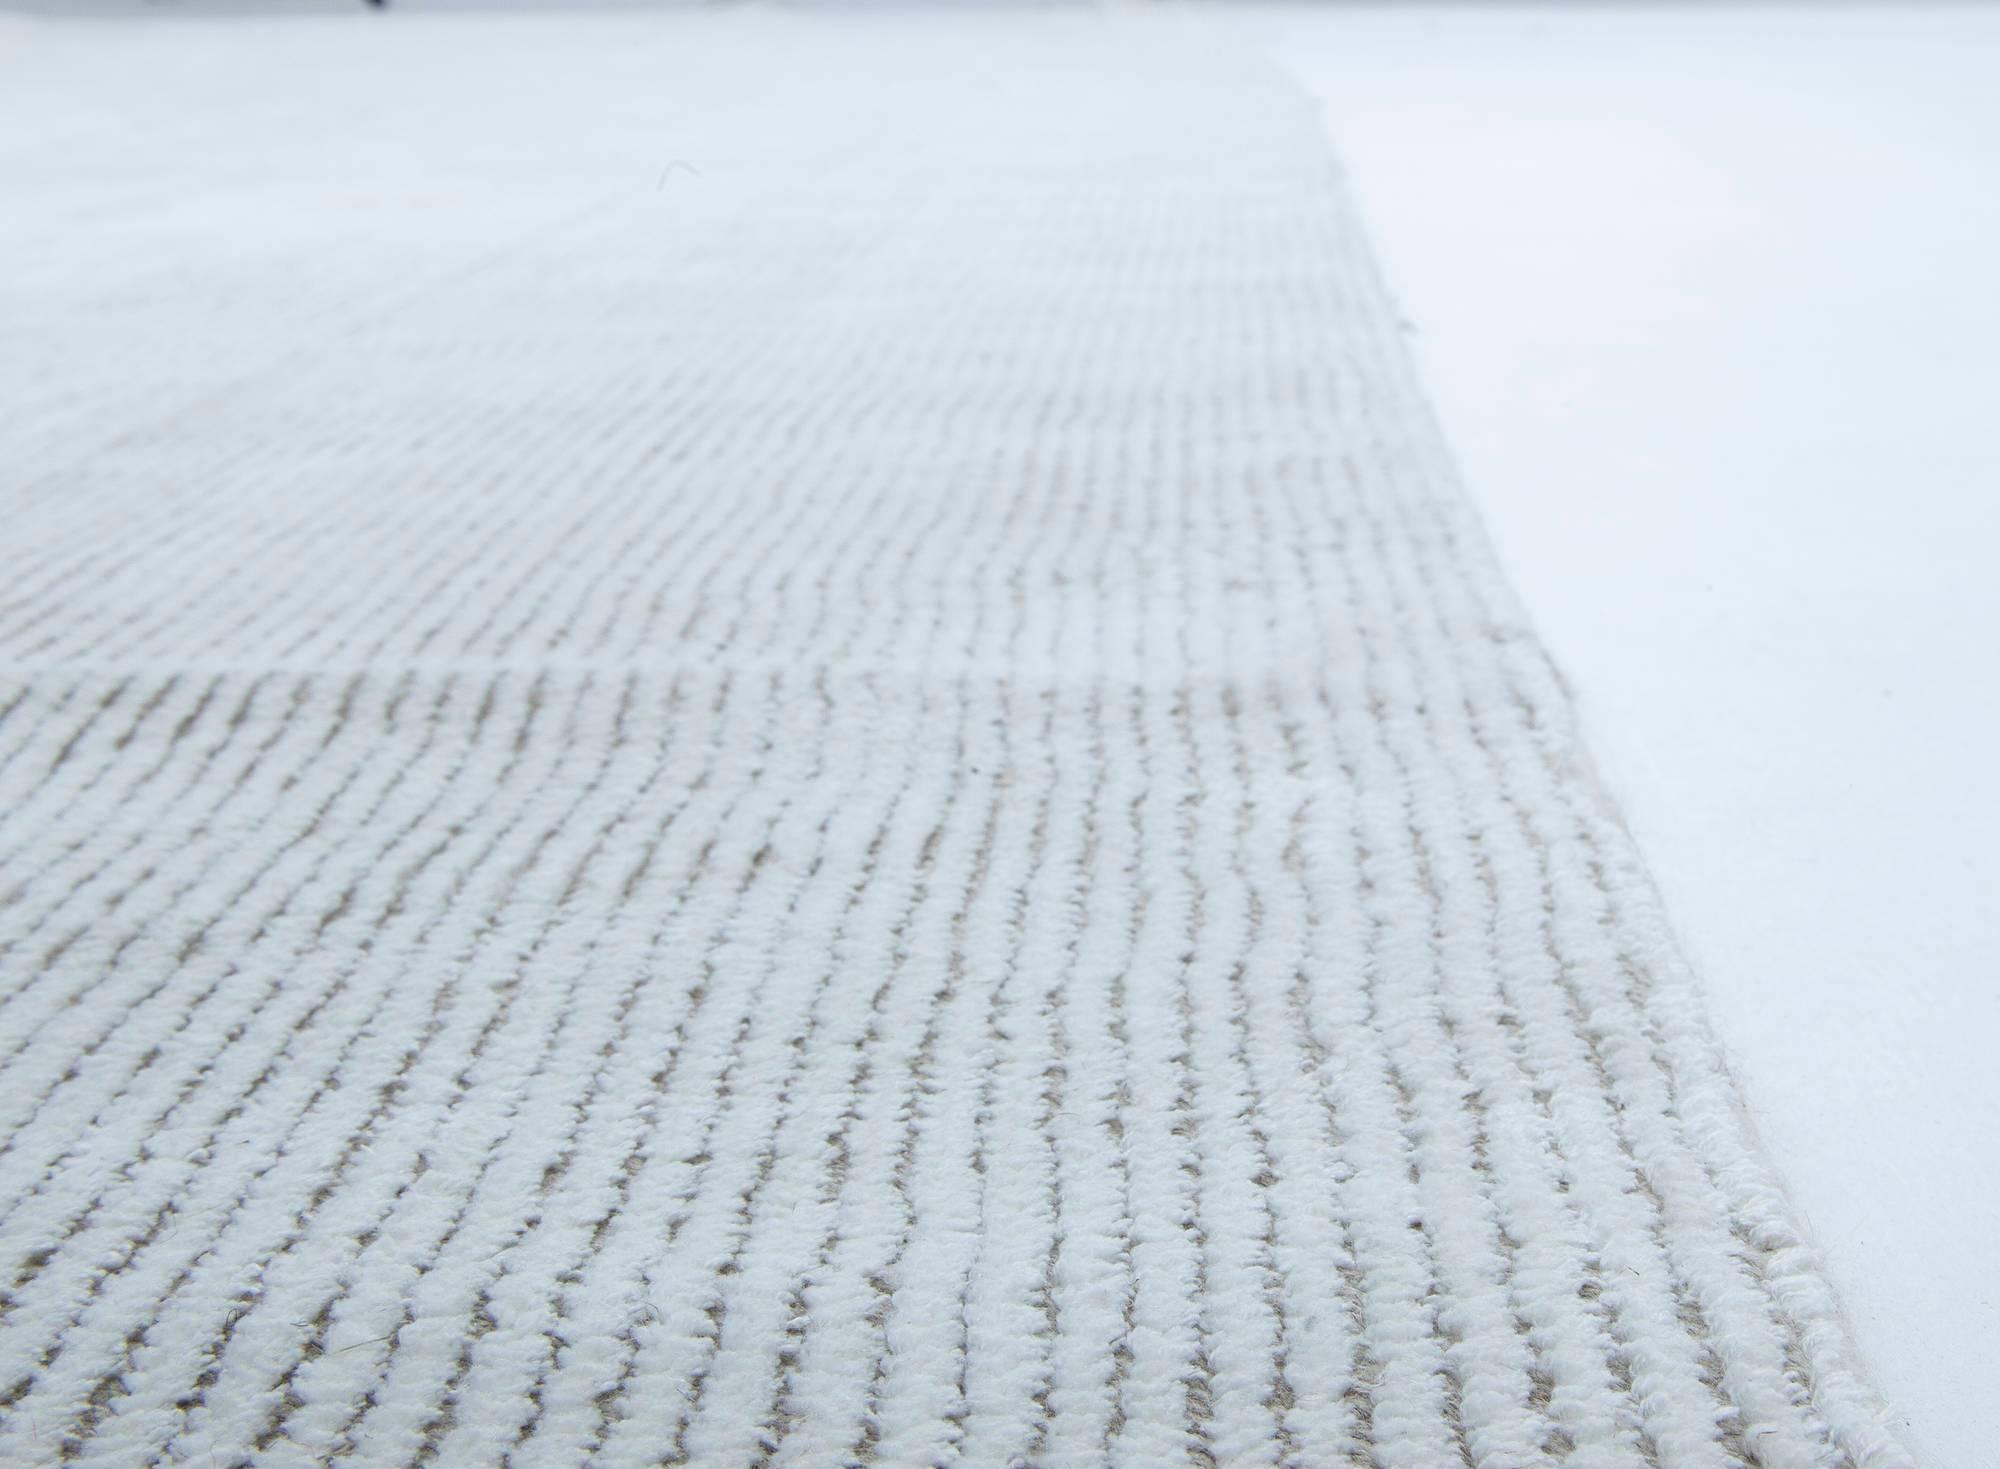 Contemporary solid white, beige and grey handmade wool rug by Doris Leslie Blau
Size: 6'3